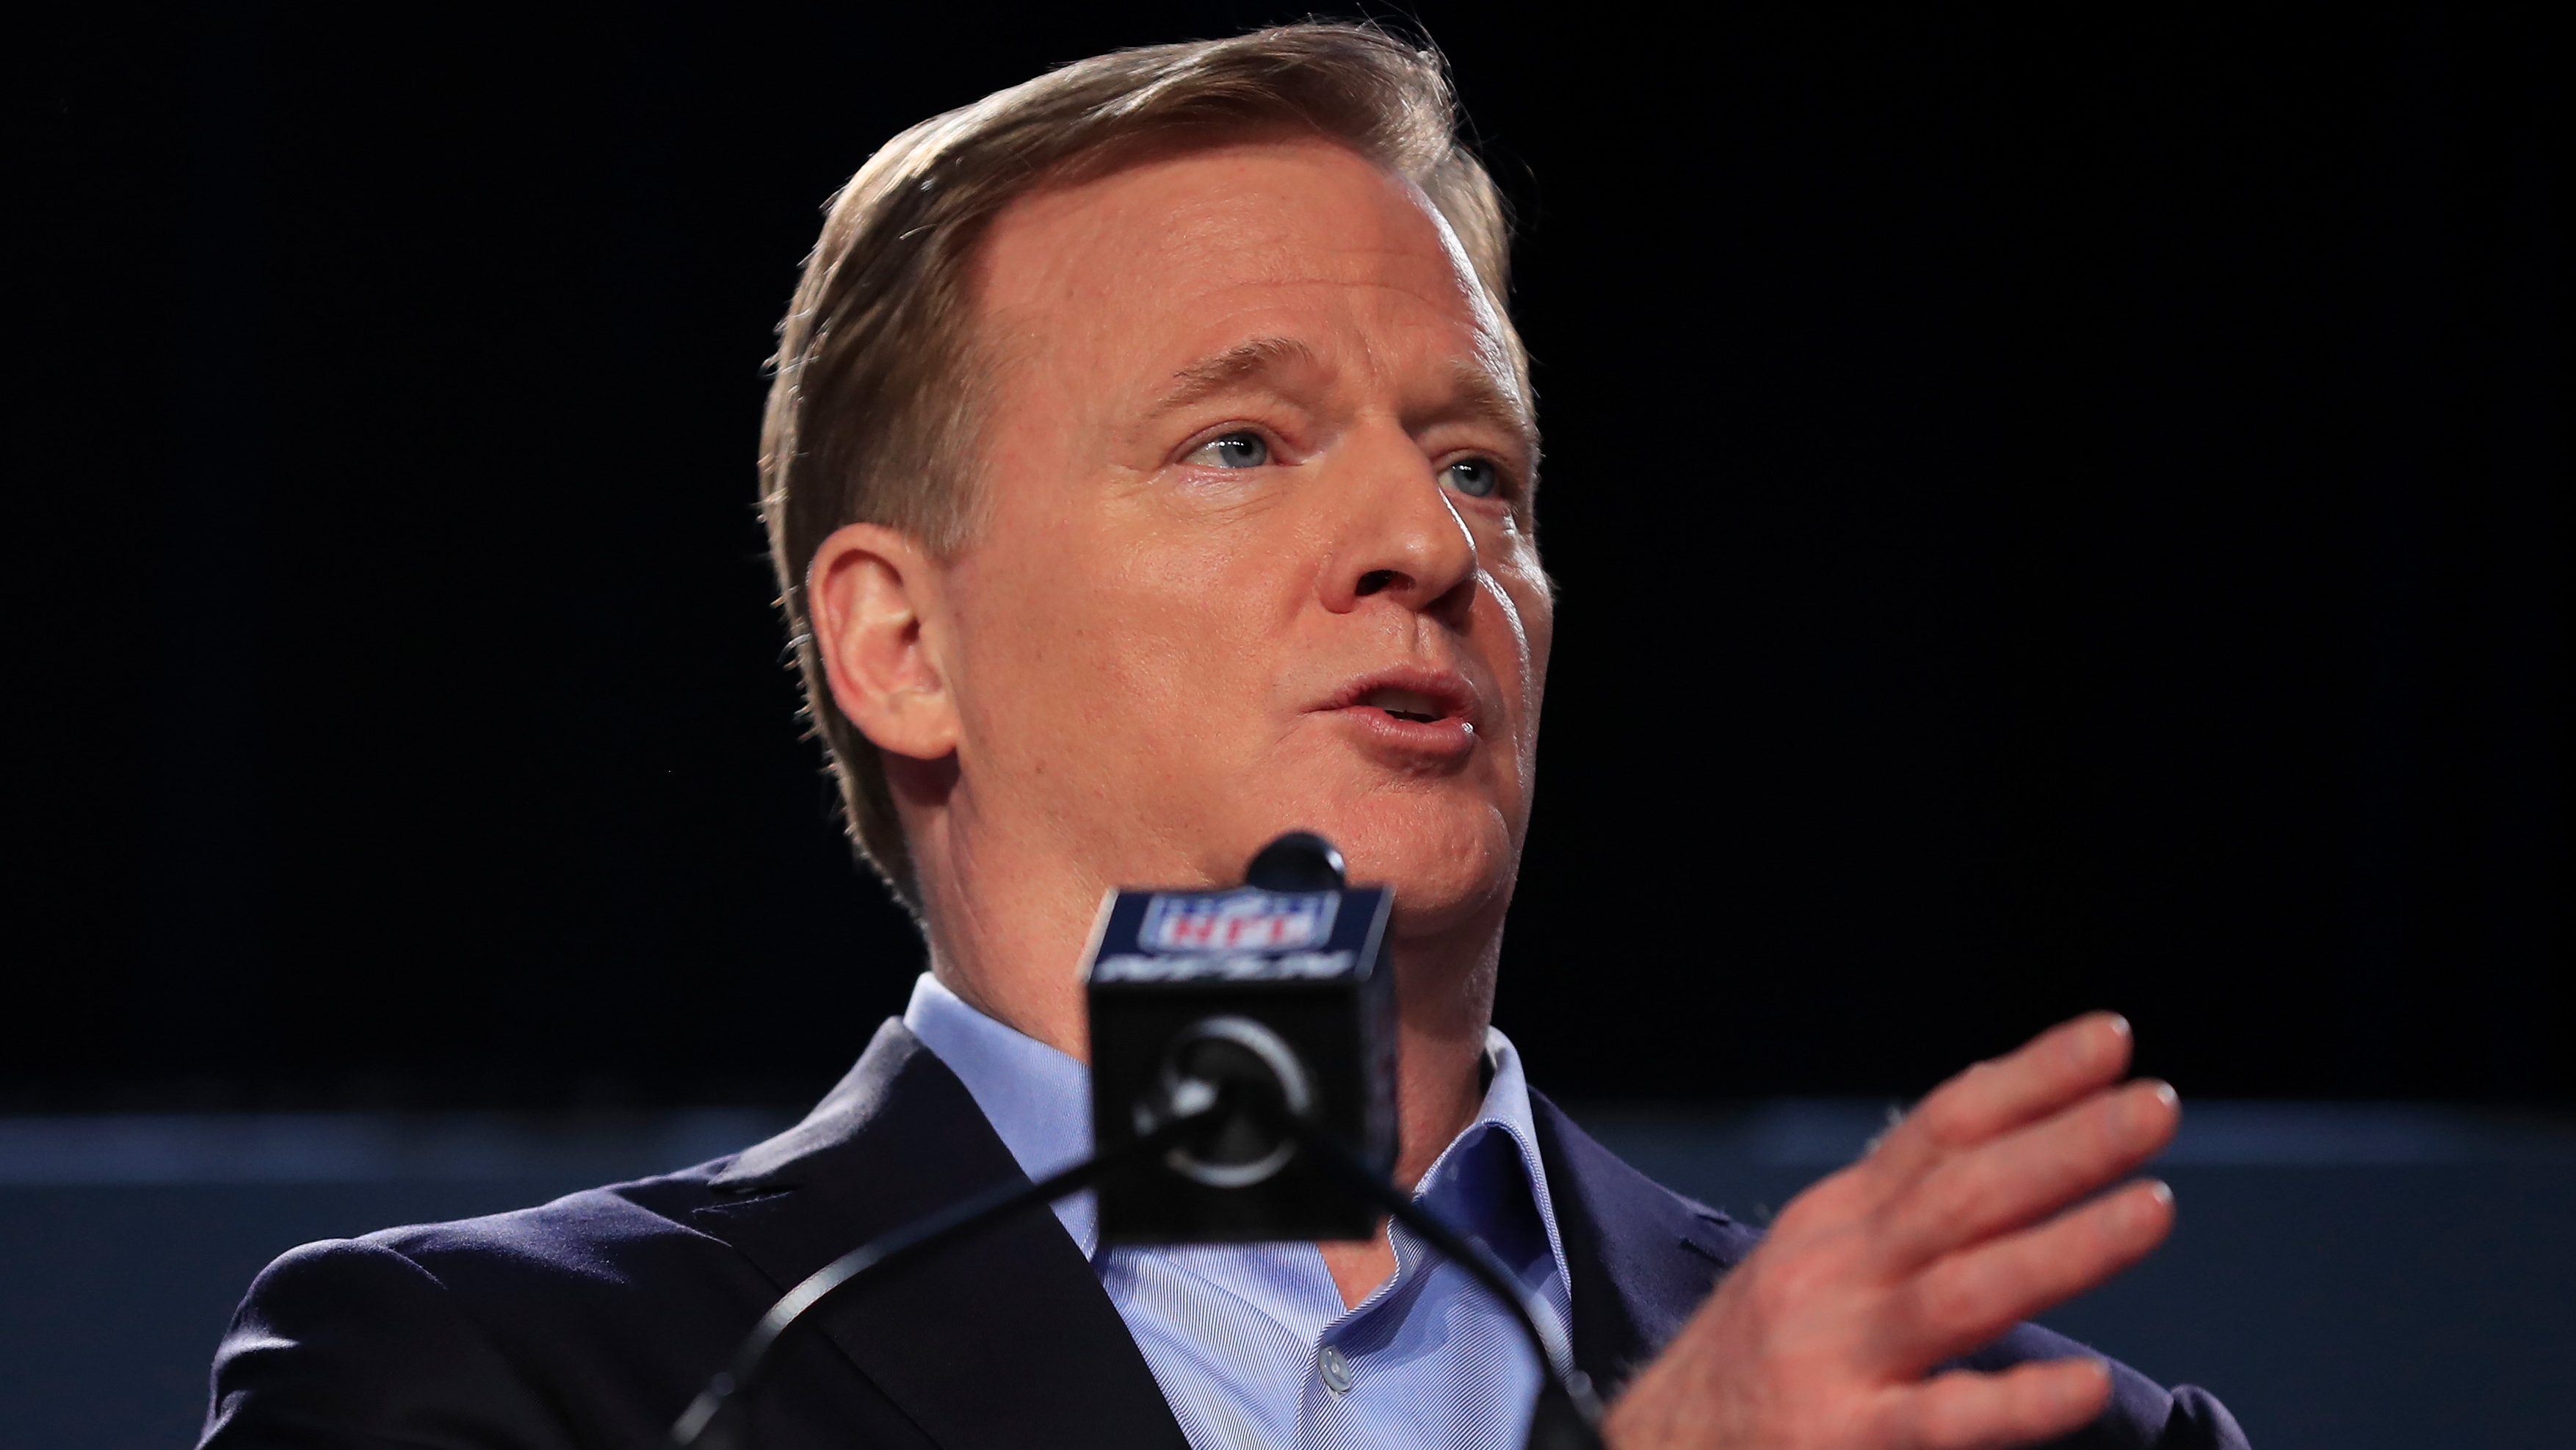 Roger Goodell's Message to NFL Players on Racial Equality